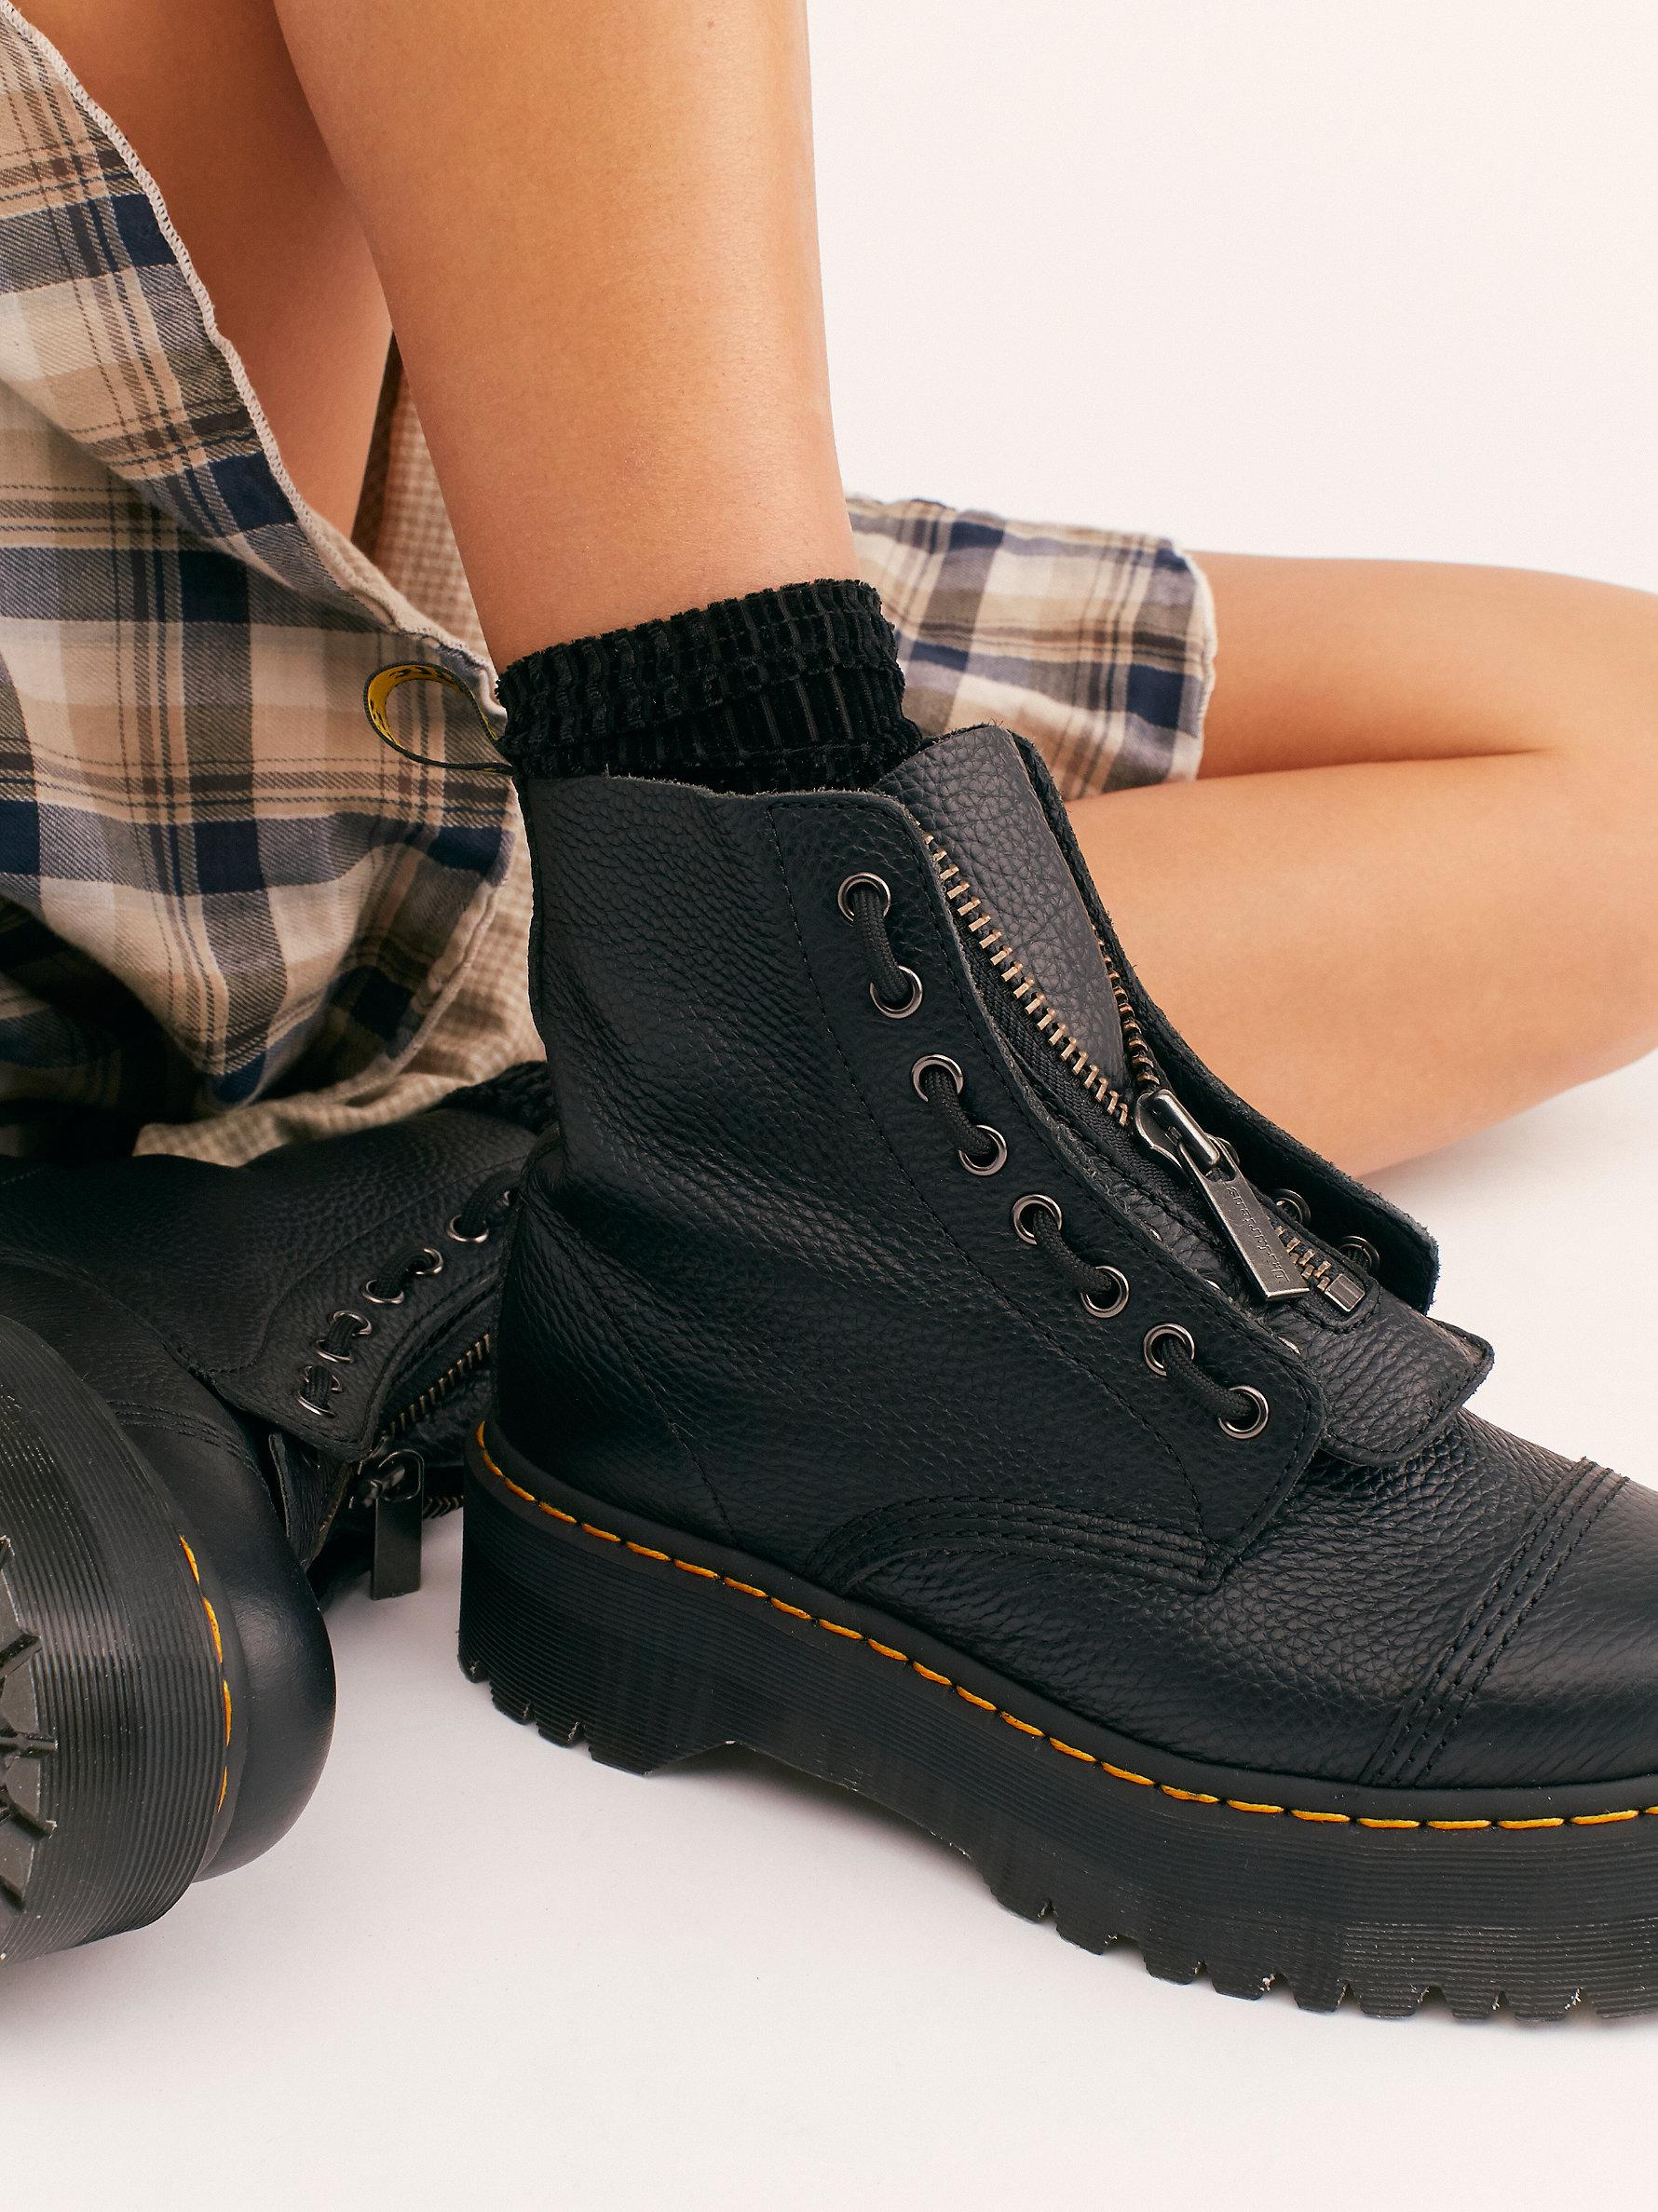 Free People Leather Dr. Martens Sinclair Zip Front Boots in Black 